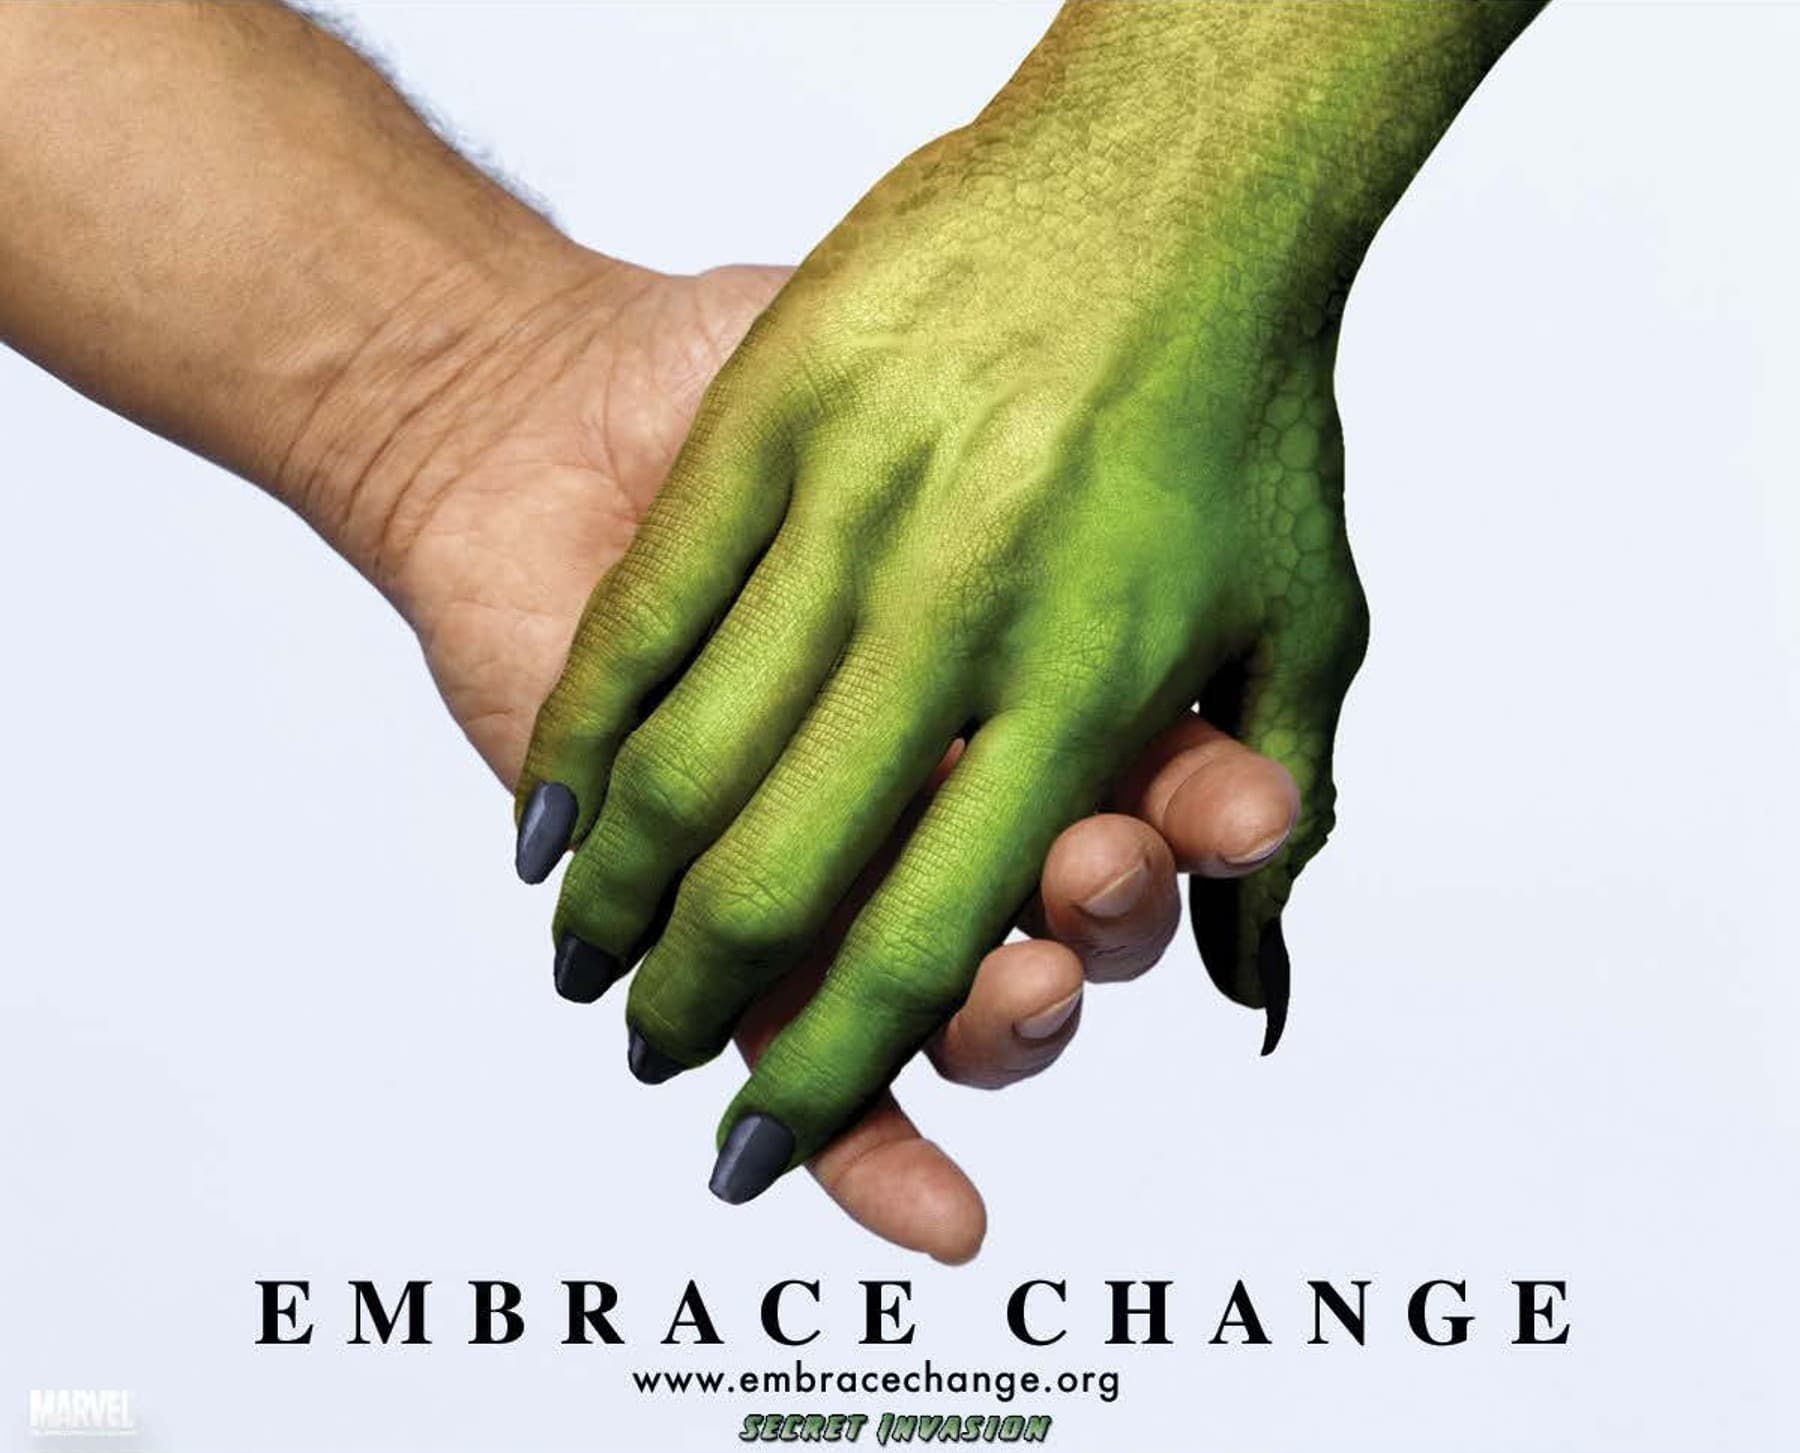 Embrace Change Promotional Image: A Skrull and Human Holding Hands